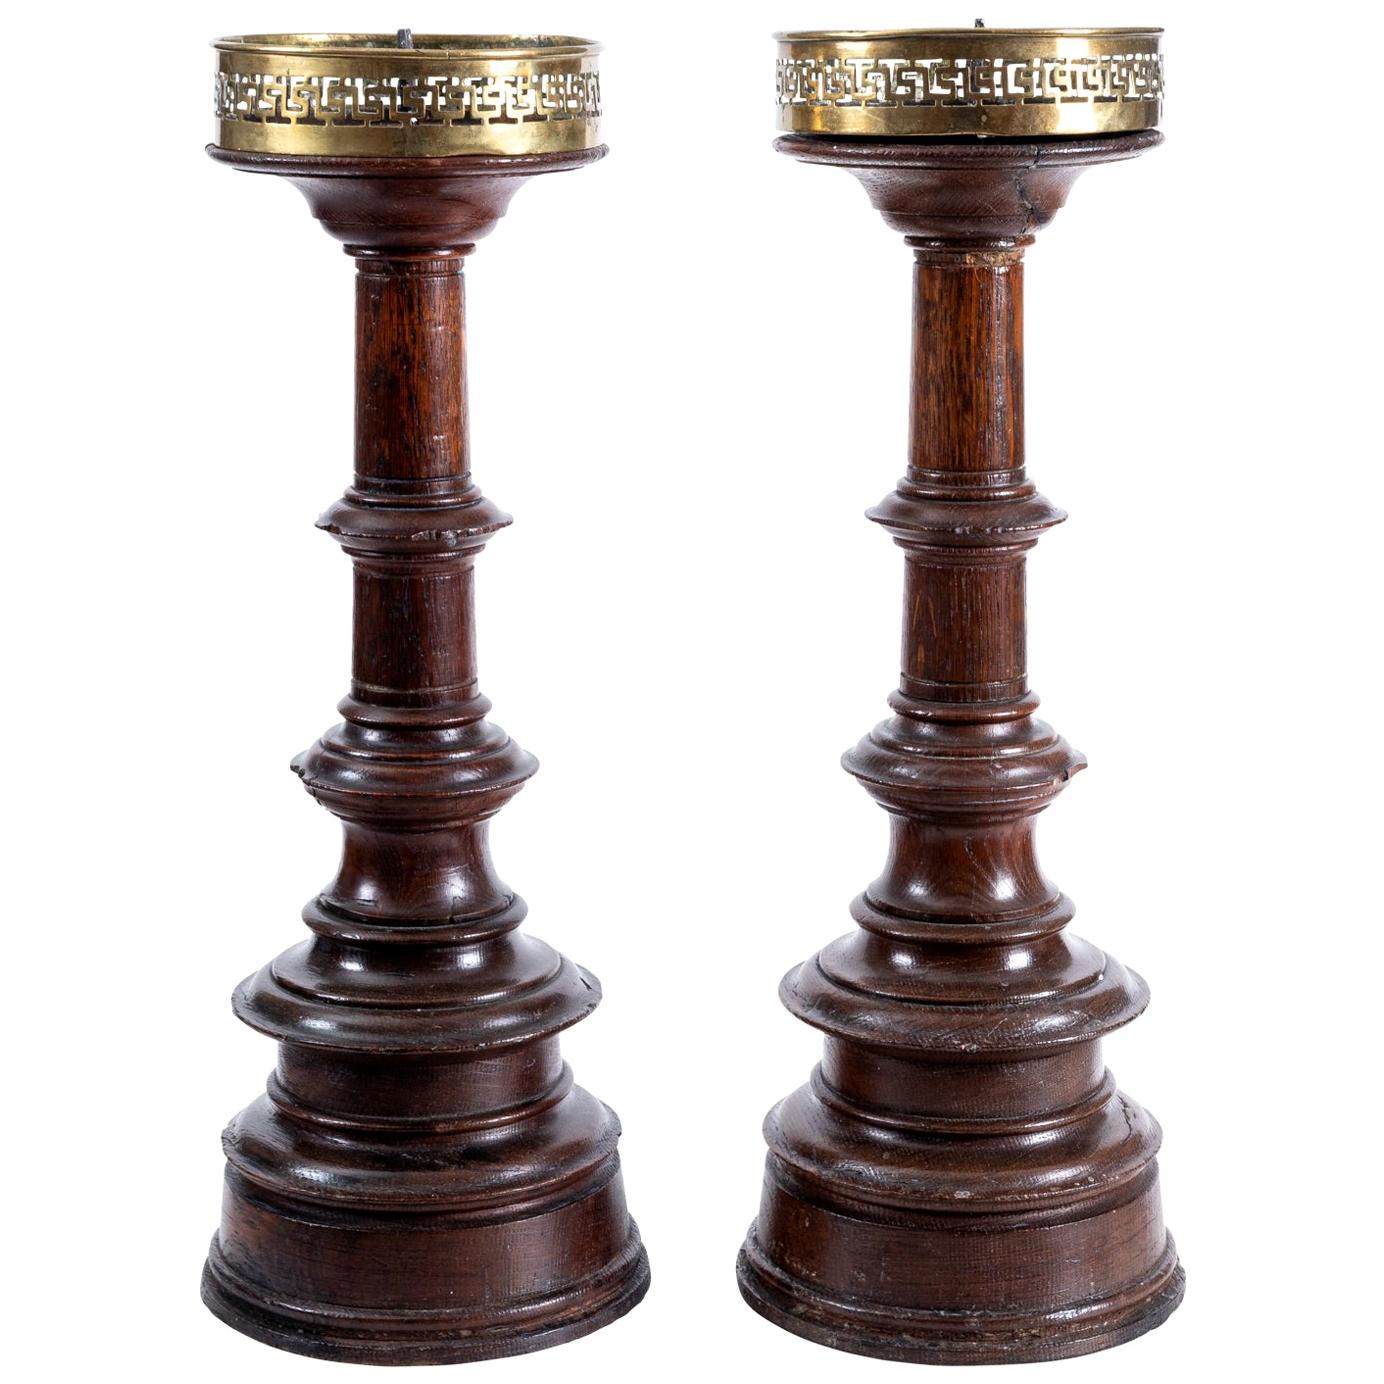 Pair of English Wooden Candlesticks